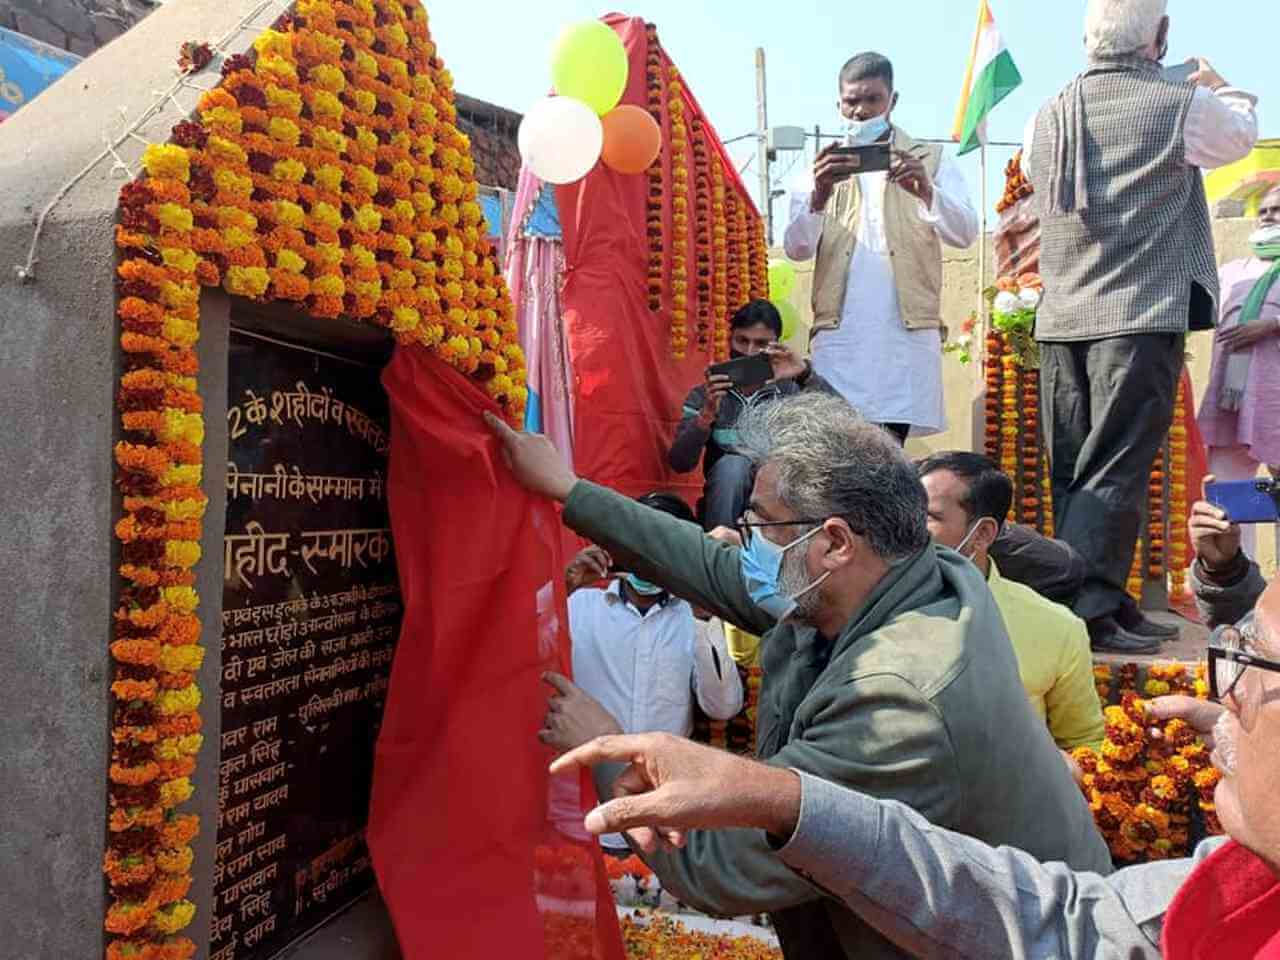 Gandhi Statue and Memorials for Martyrs Unveiled